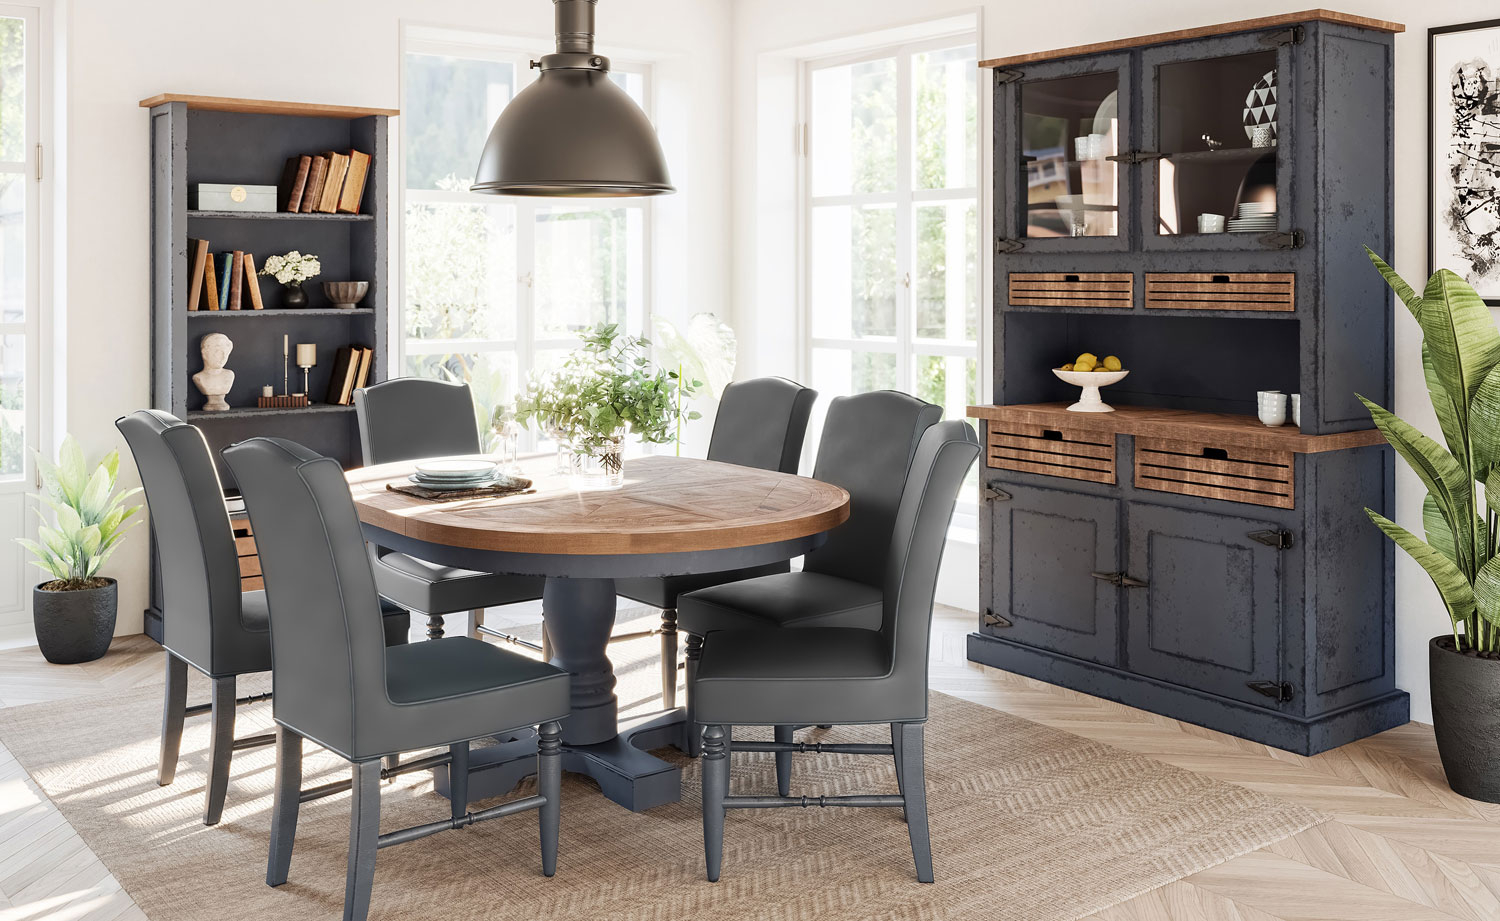 Pine Furniture Collections - Hemmingway Distressed Collection